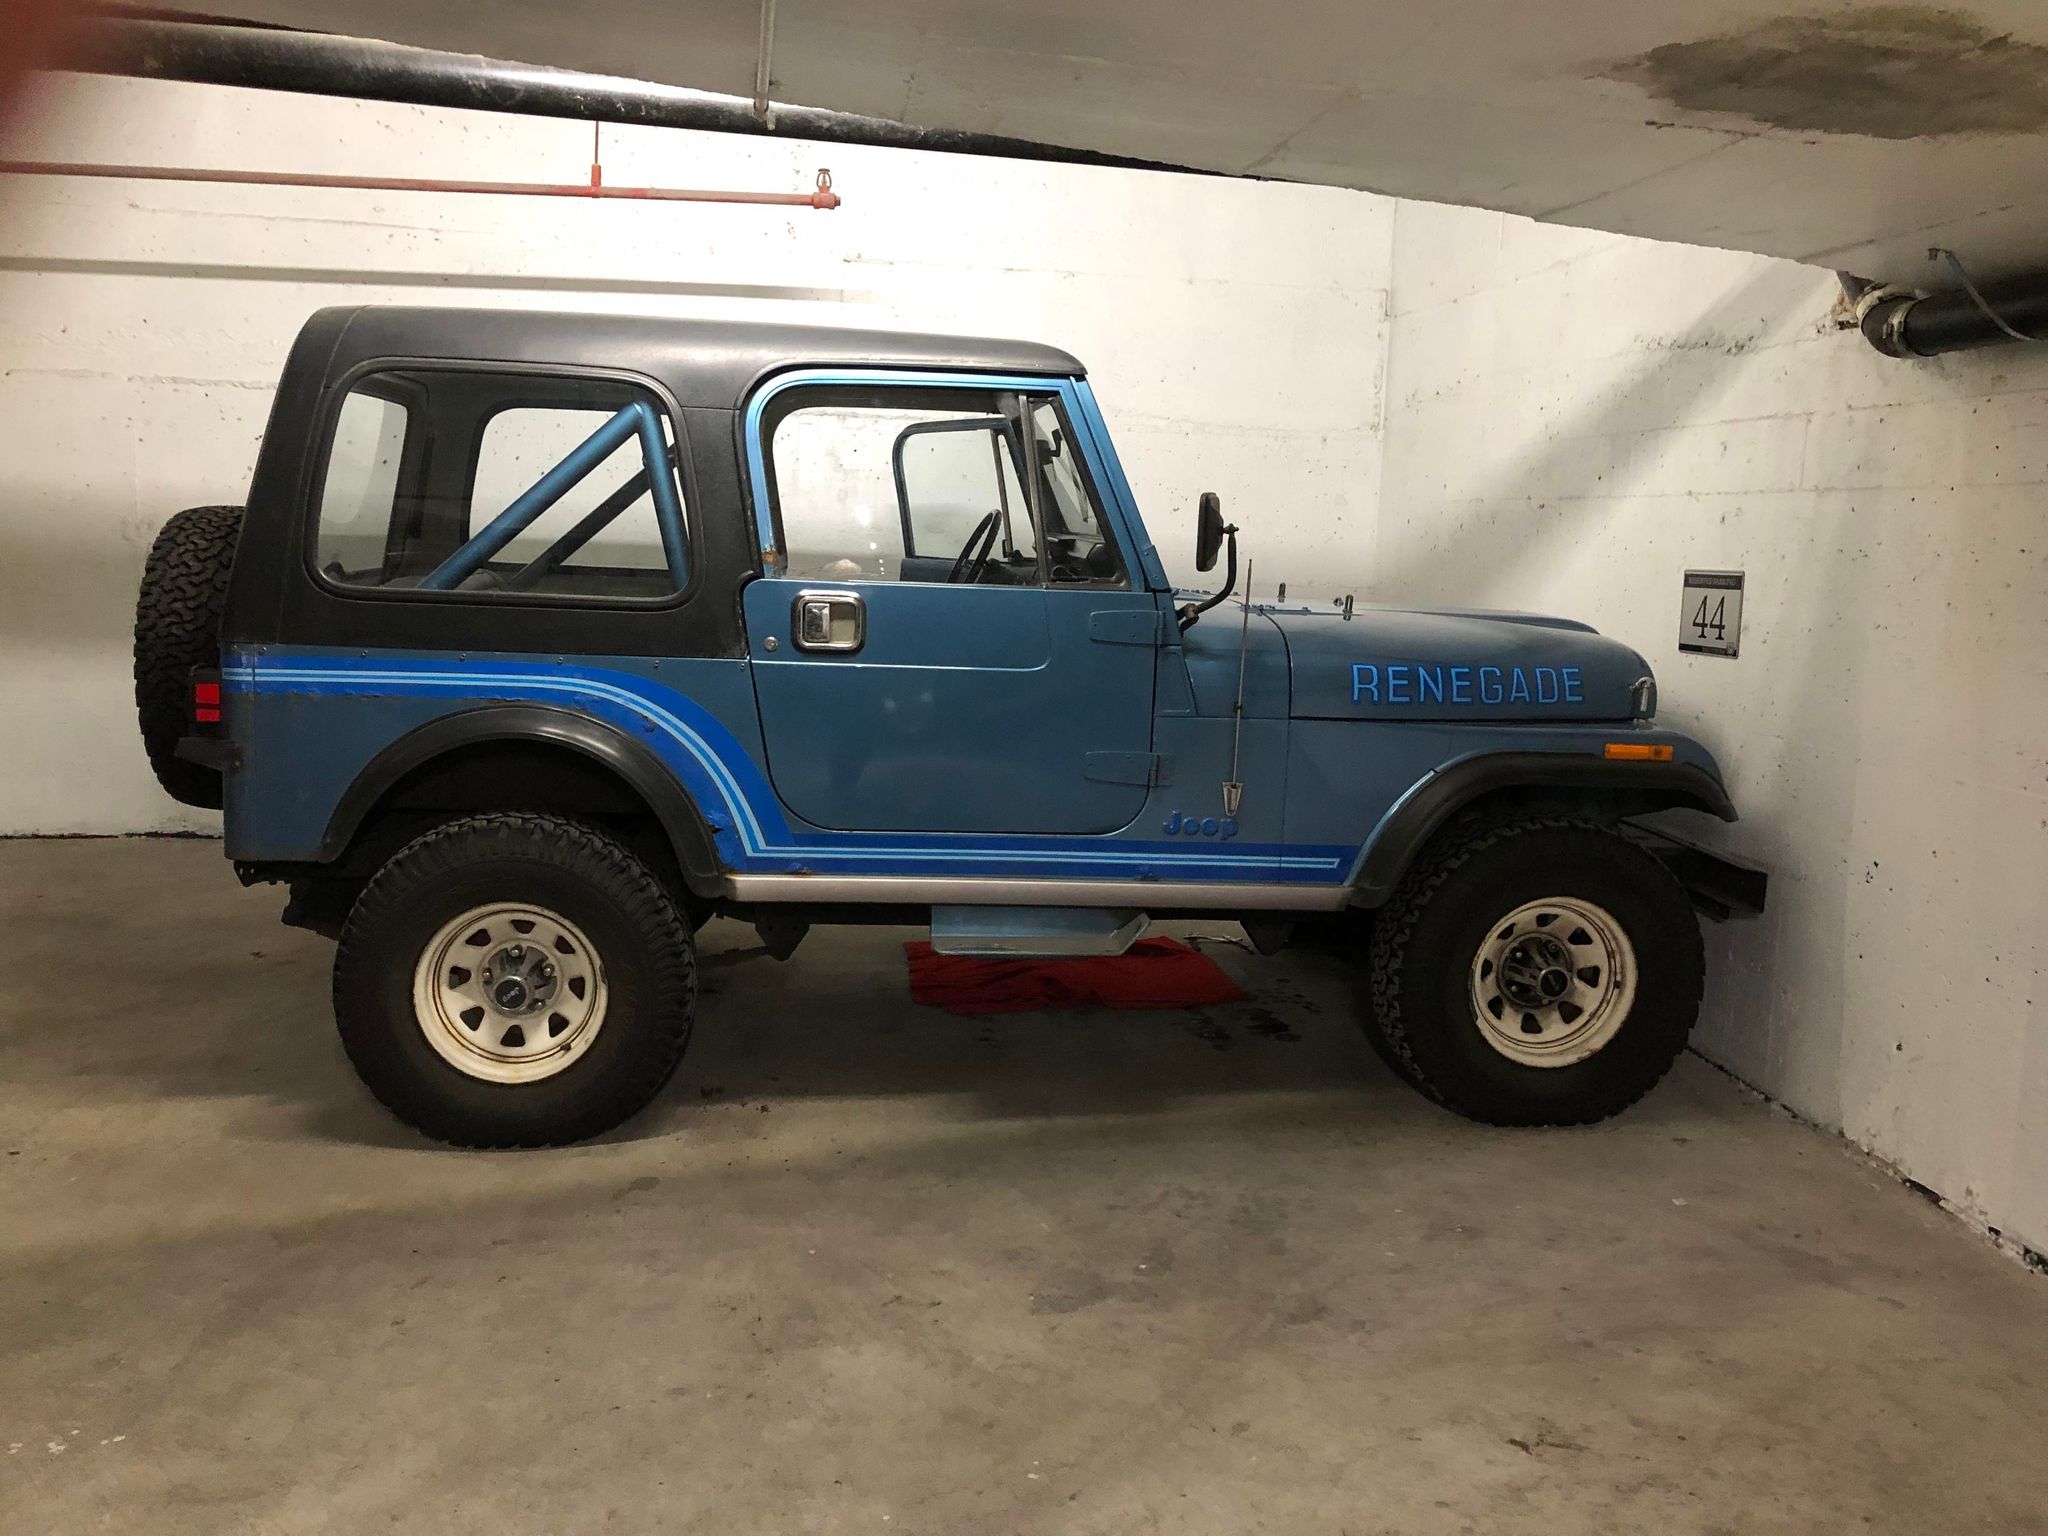 Ford Bronco 3500 miles in 7 days. 'My Impressions" and Comparisons (from a 20+ Jeeps veteran) EF7B055F-13AD-4F62-A68C-7B77D4C10ECA